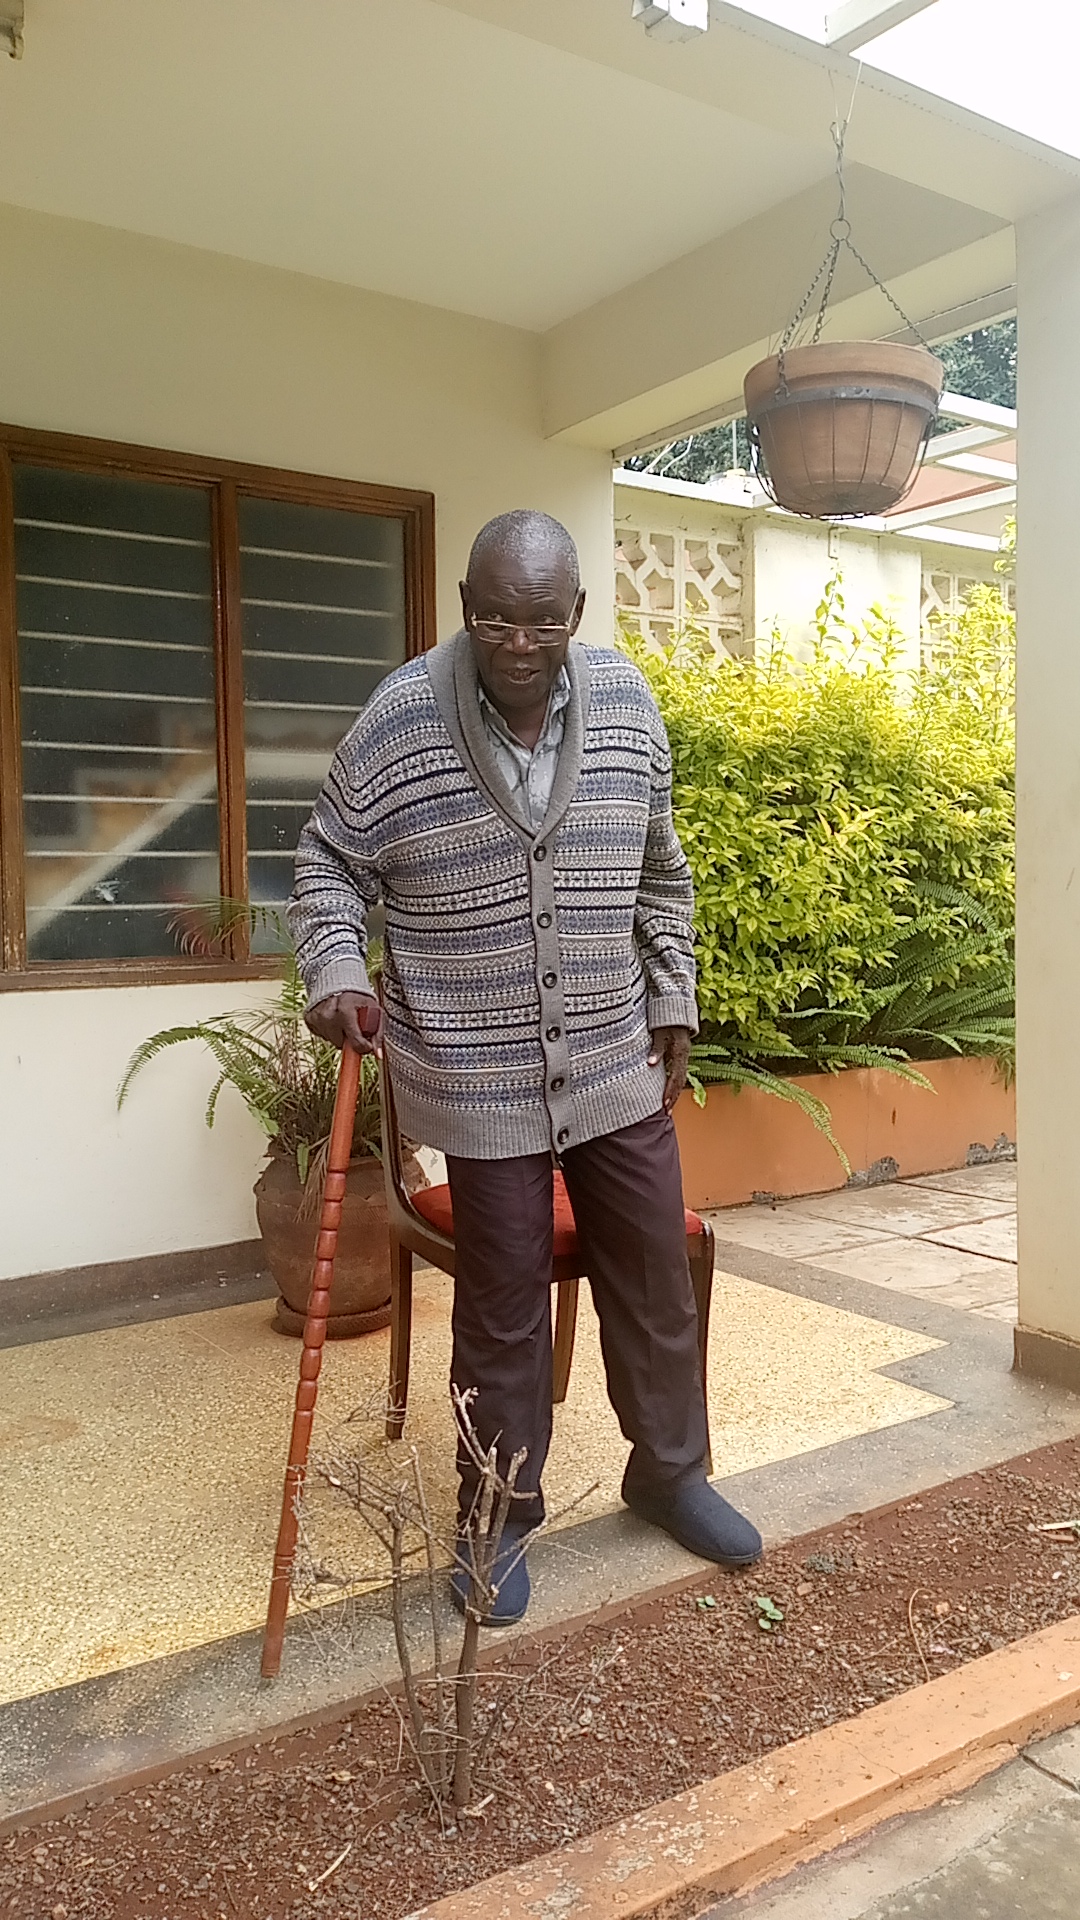 Sickly Man aged 81 years old accuses Dp Gachagua’s linked company for attempting to grab his land, wants justice